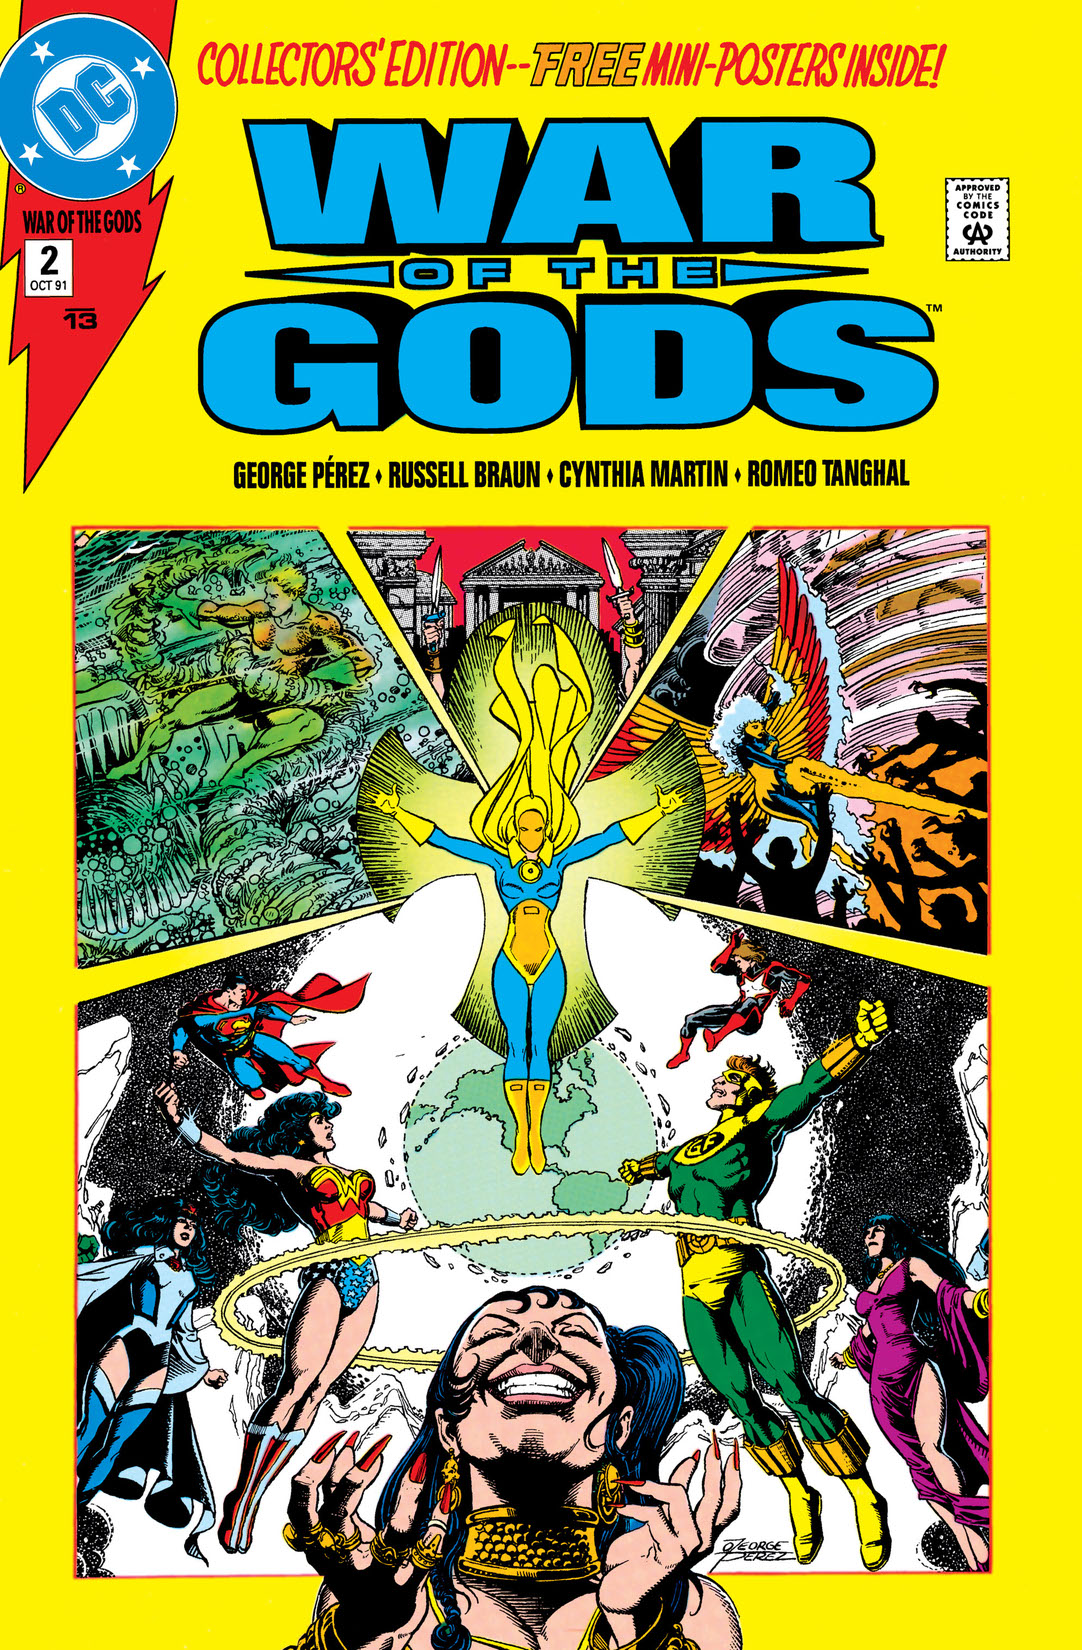 The War of the Gods #2 preview images